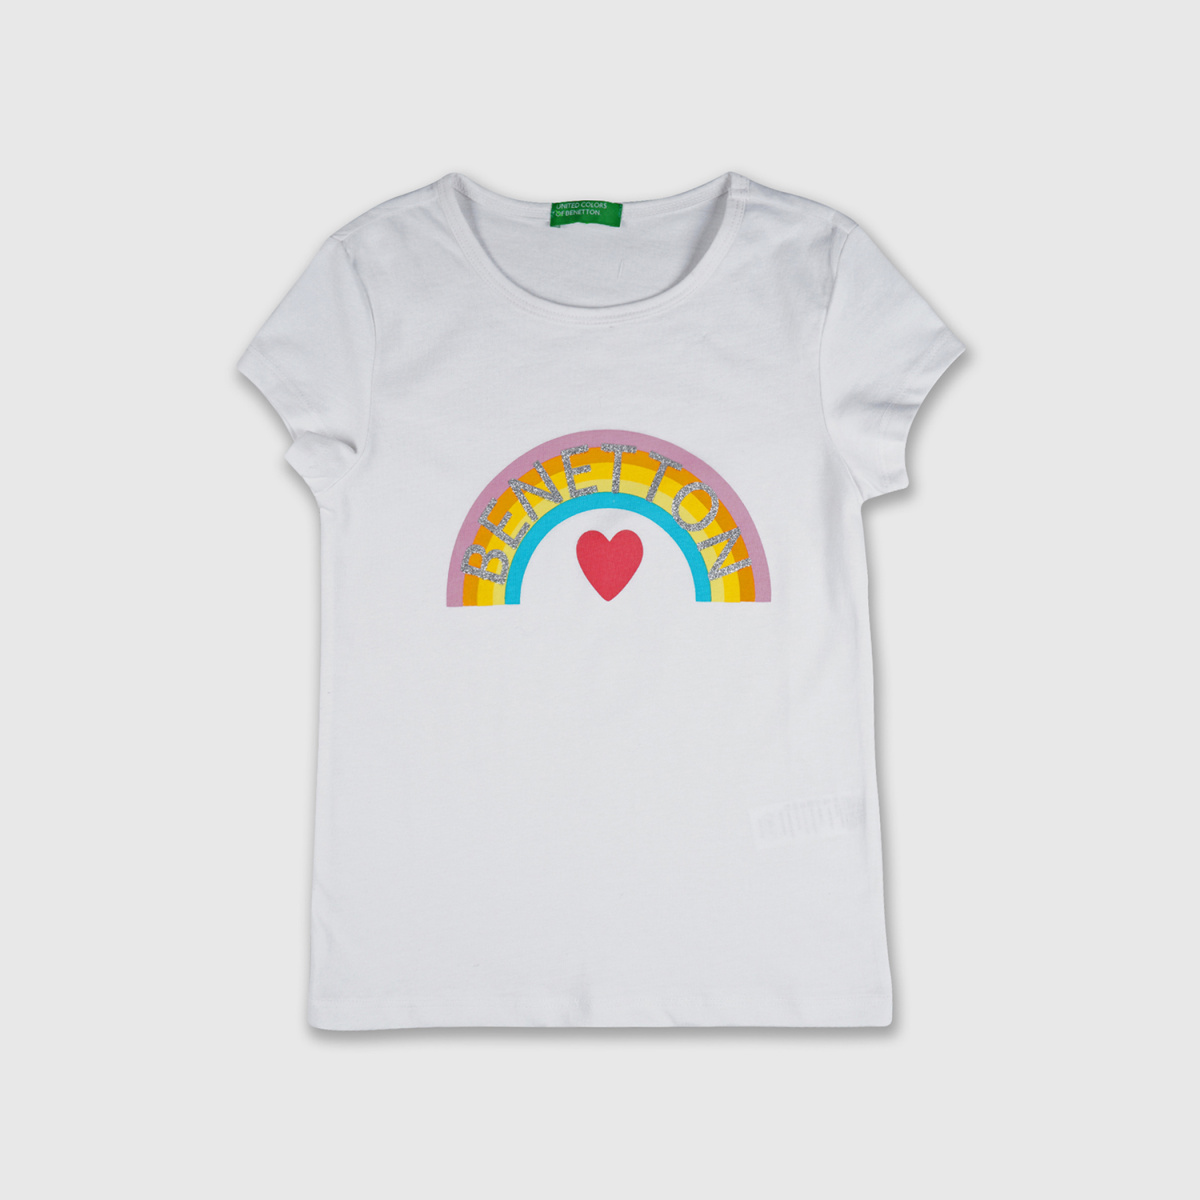 UNITED COLORS OF BENETTON Girls Printed Round Neck T-shirt